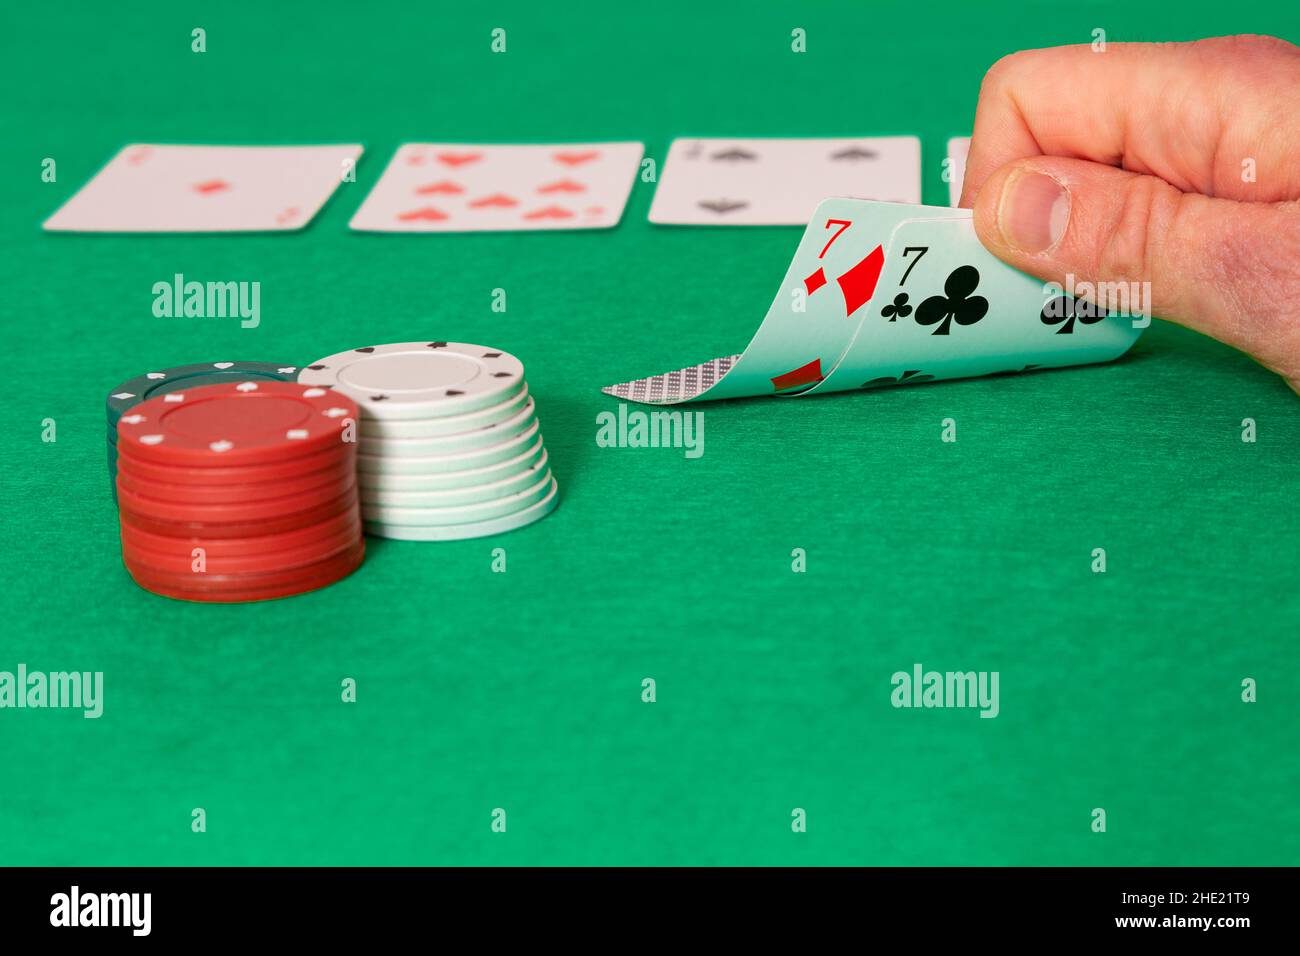 On a green mat you can see a man's hand holding up two poker cards with his fingers, both cards are sevens. Next to them are stacked chips and in the Stock Photo